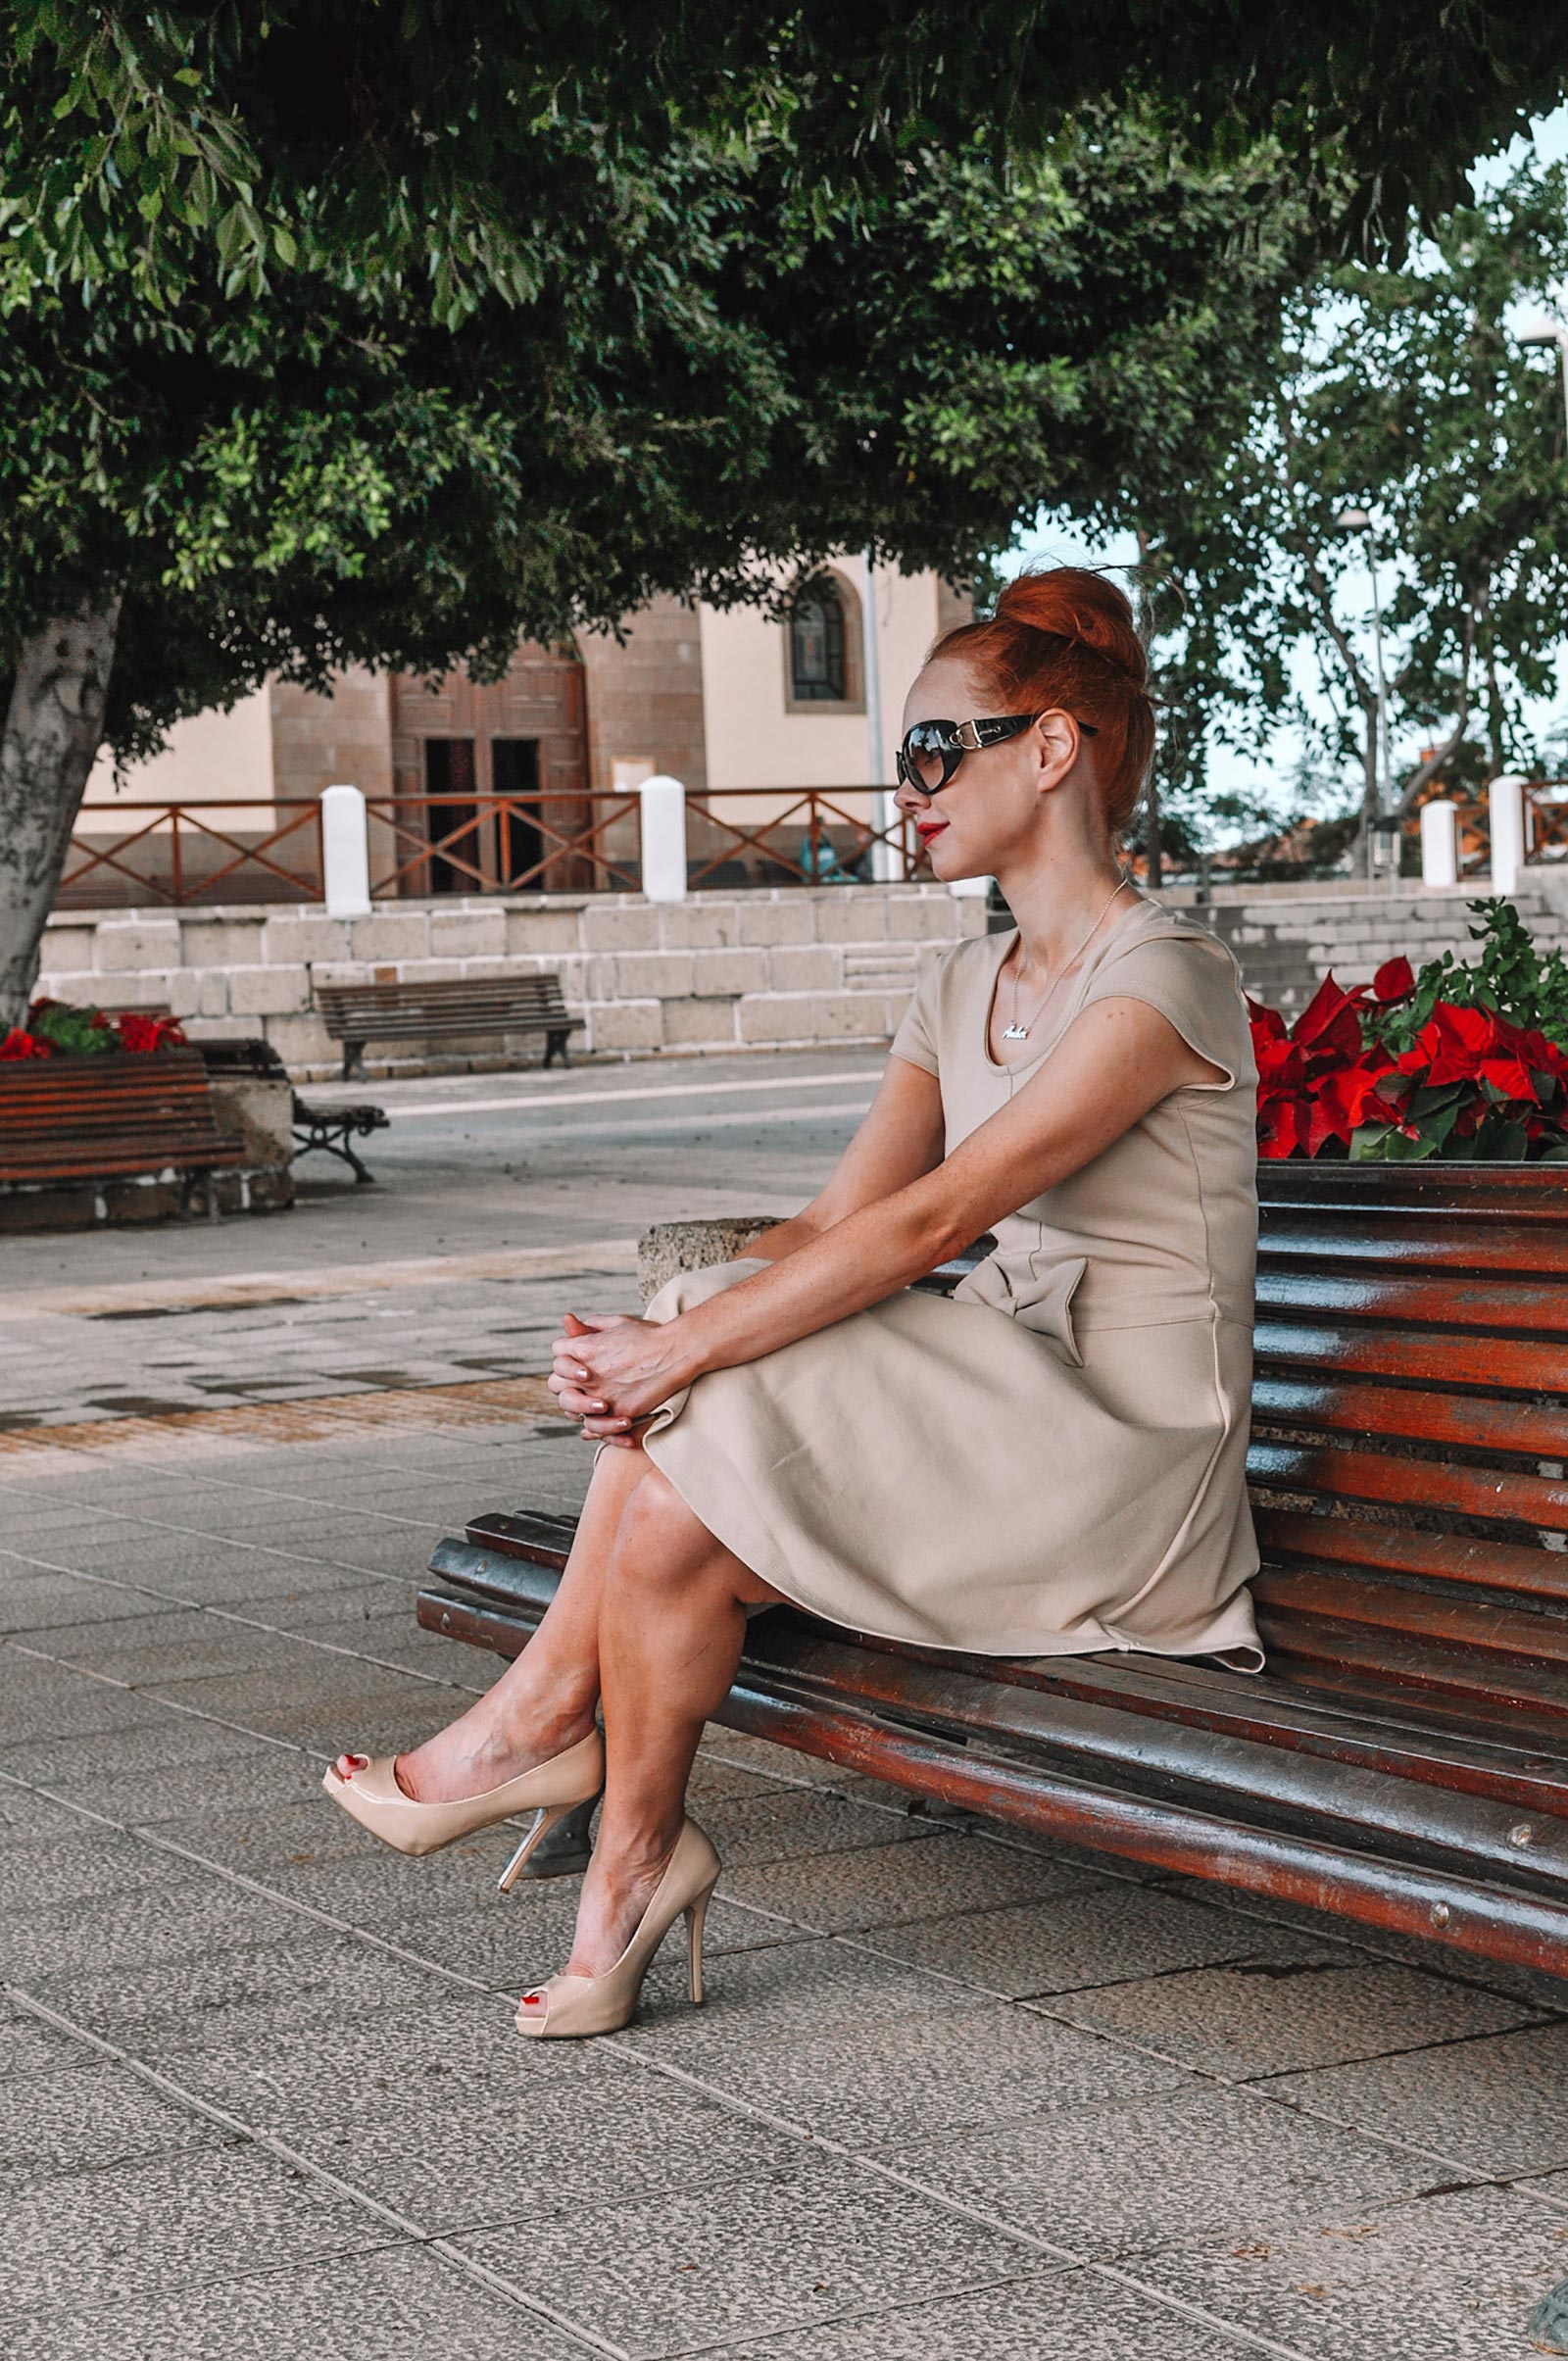 Amber sits on a park bench in a pretty Spanish square. She is wearing a beige mini dress, high heels, and dark sunglasses, with her hair up 